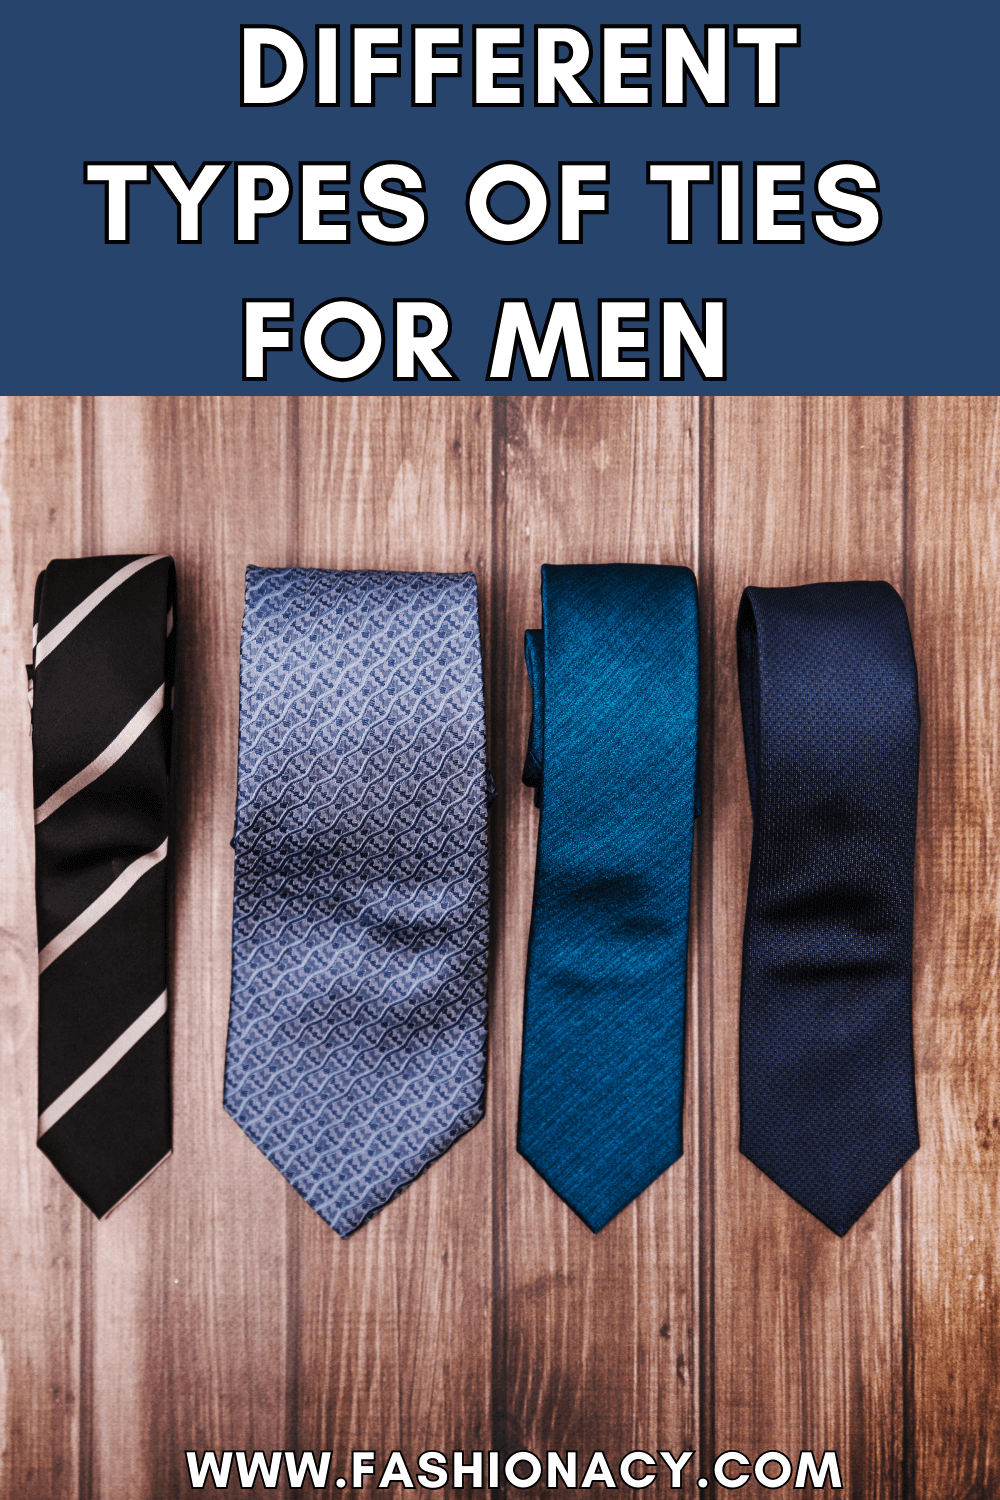 5 Different Types of Men's Ties You Need To Own